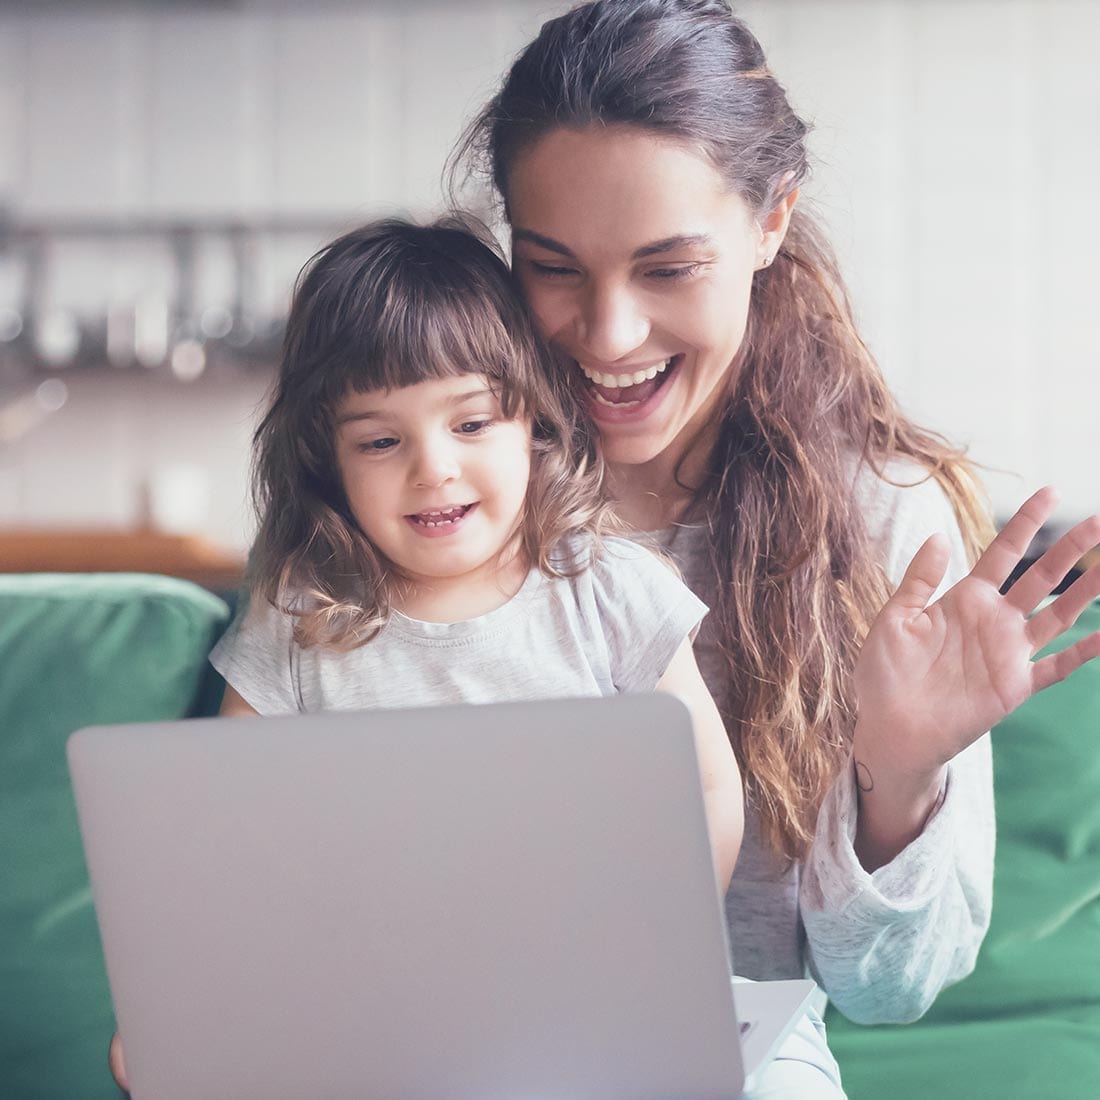 Child participating in an online tutoring session with her mother